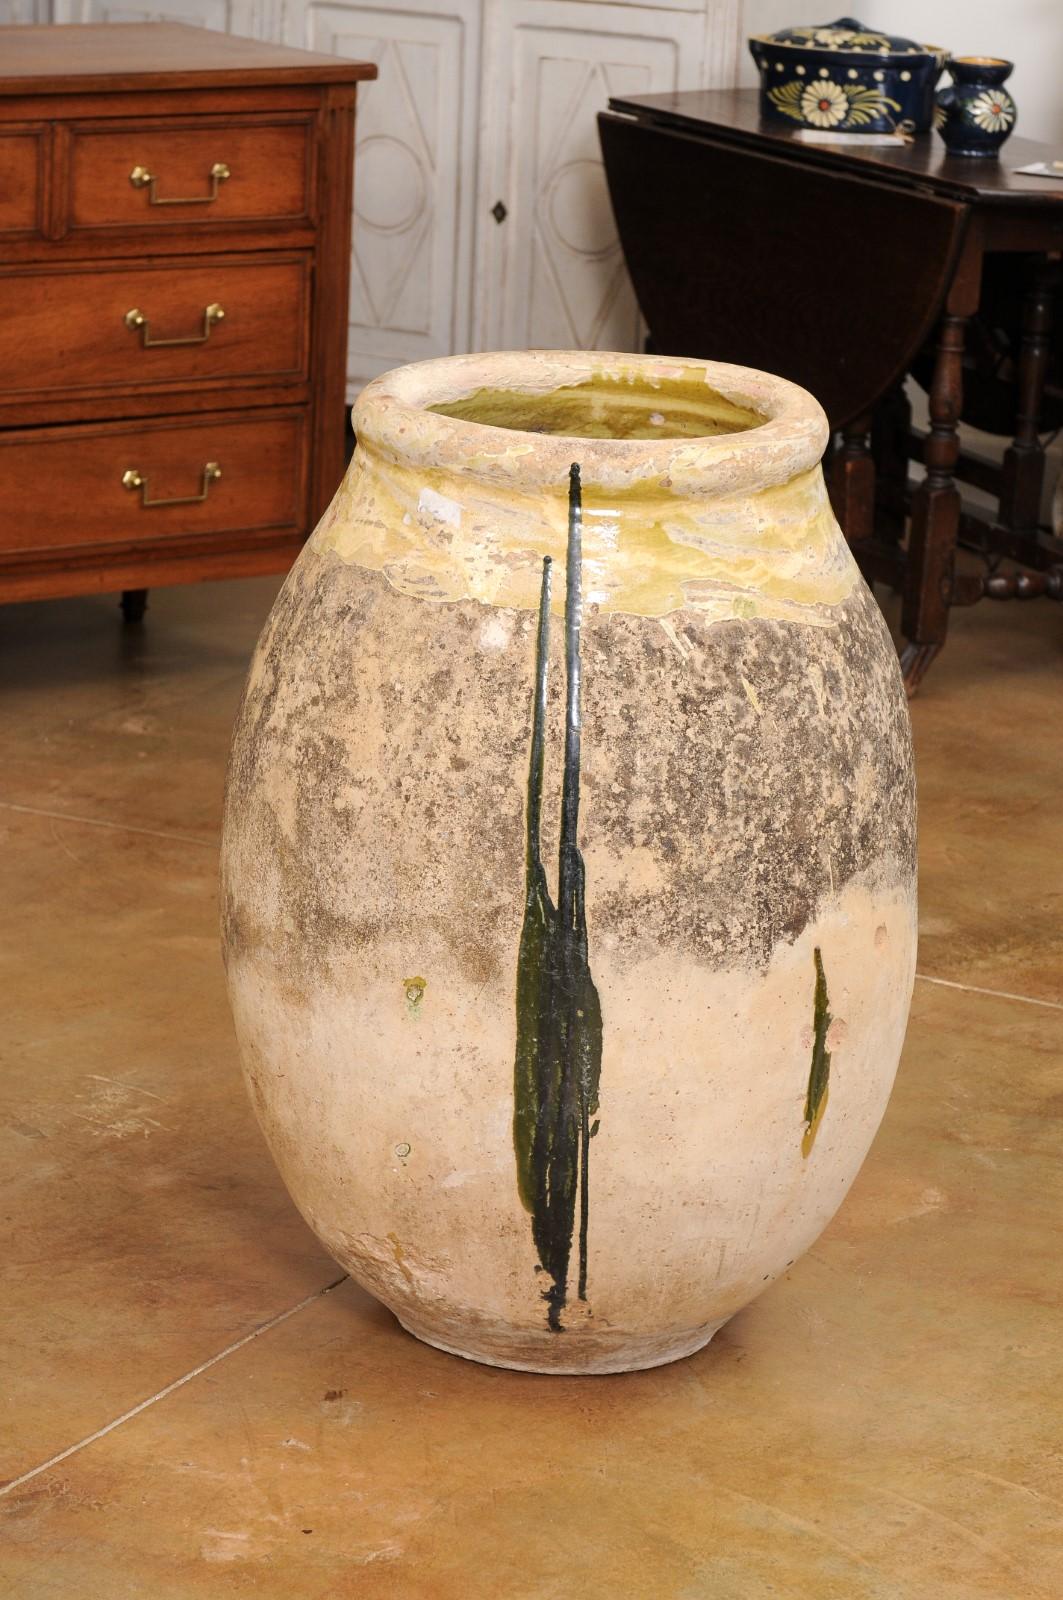 French 19th Century Terracotta Biot Jar with Yellow Glaze and Rustic Character For Sale 4